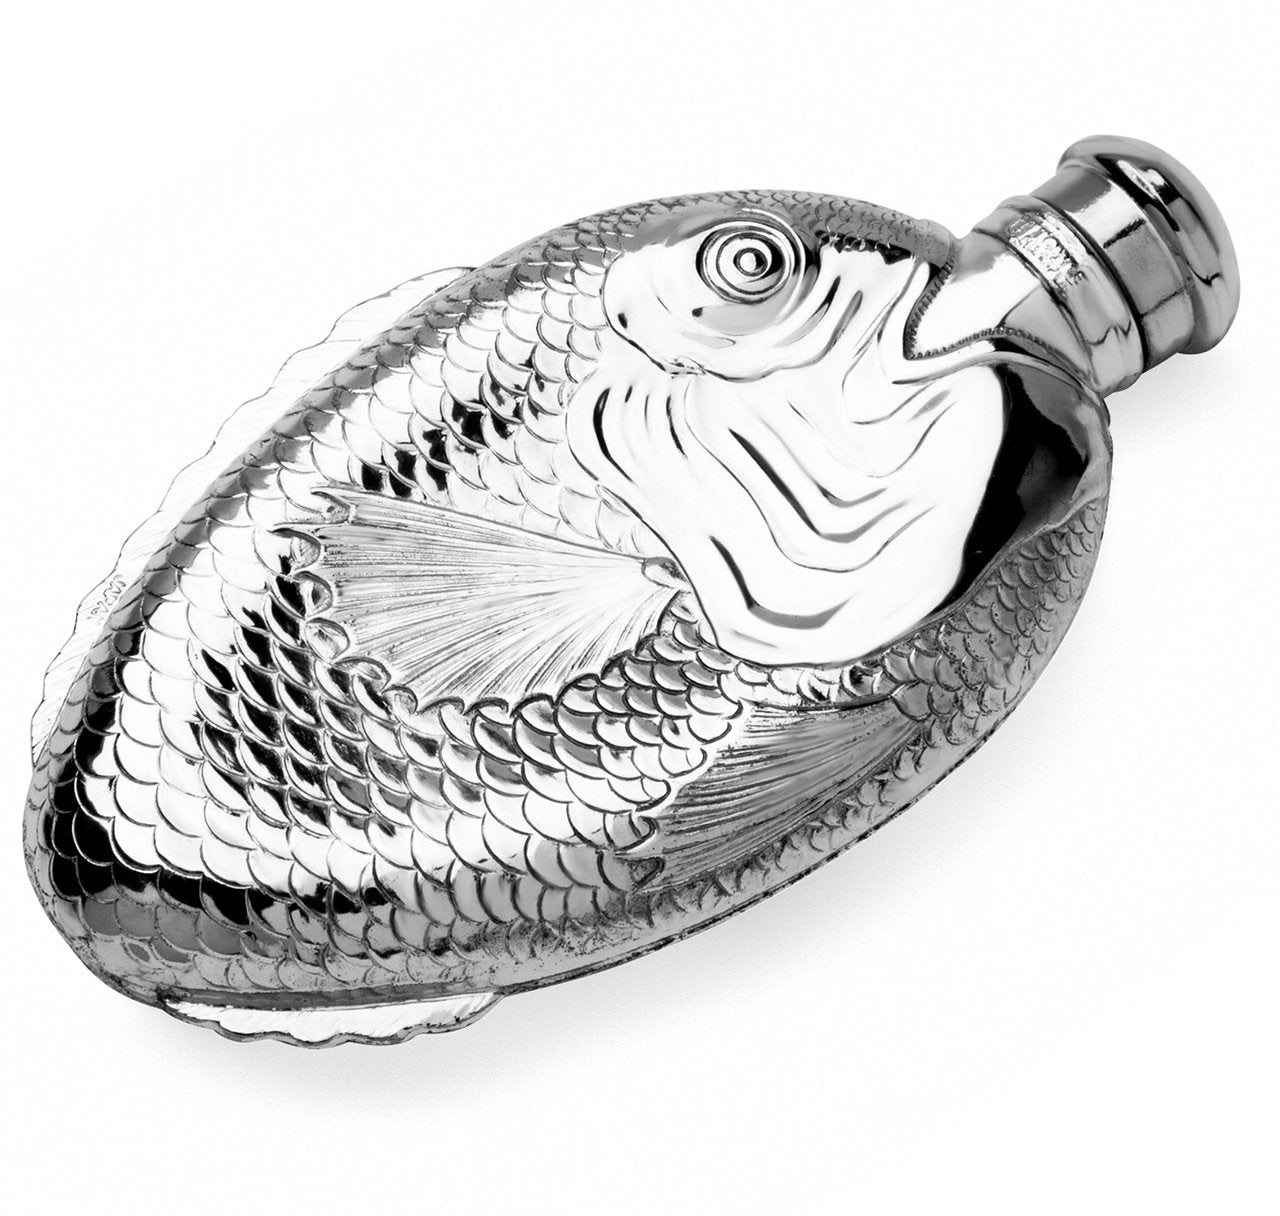 Towle Silver-Plated Fish Hip Flask